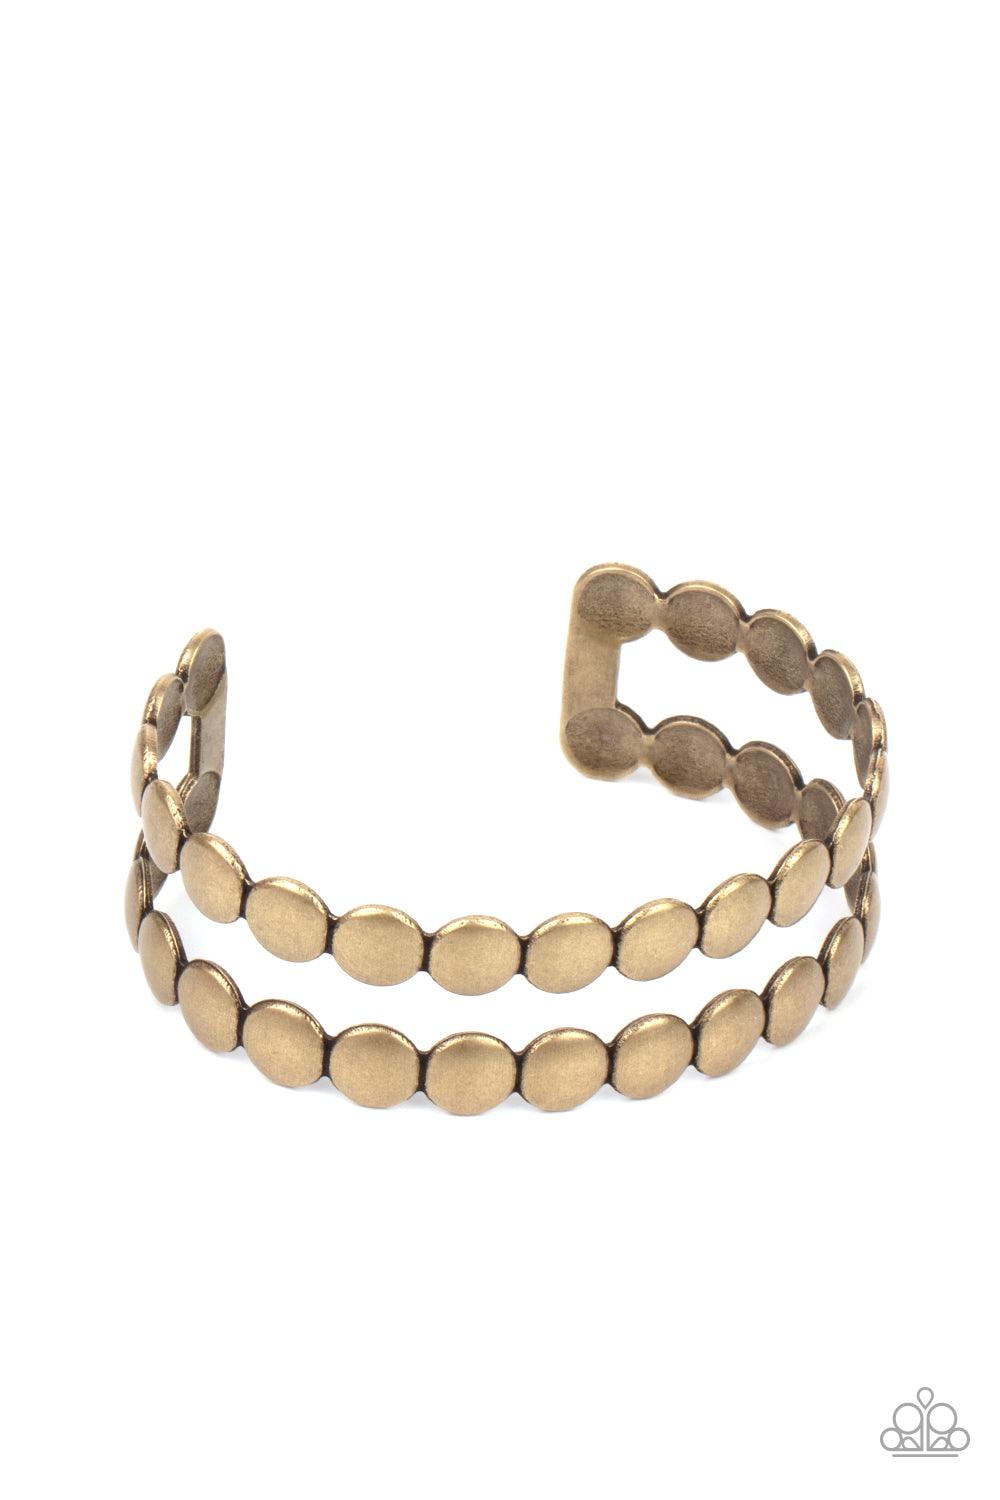 Paparazzi Accessories On The Spot Shimmer - Brass Brushed in an antiqued finish, rows of flattened brass studs coalesce into a rustic cuff around the wrist. Sold as one individual bracelet. Jewelry